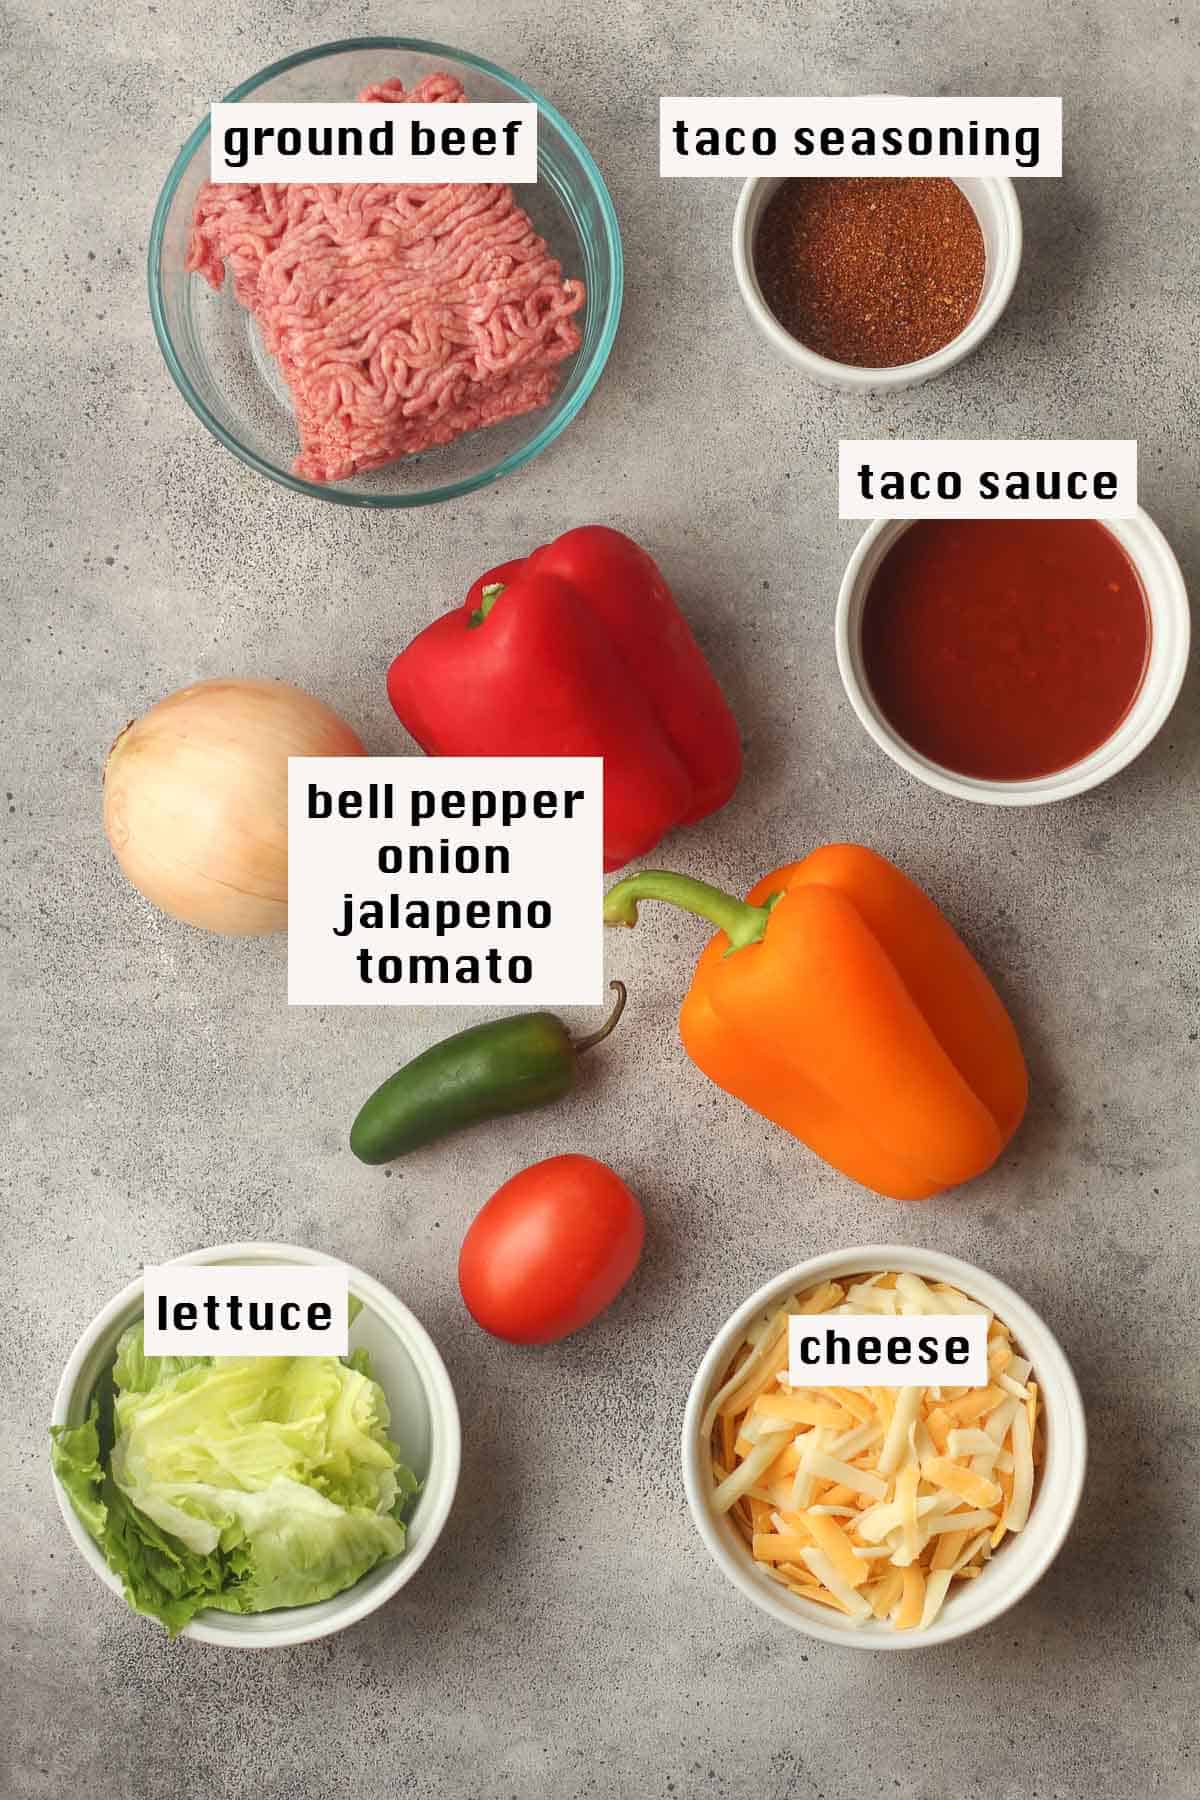 The ingredients for the taco pizza.